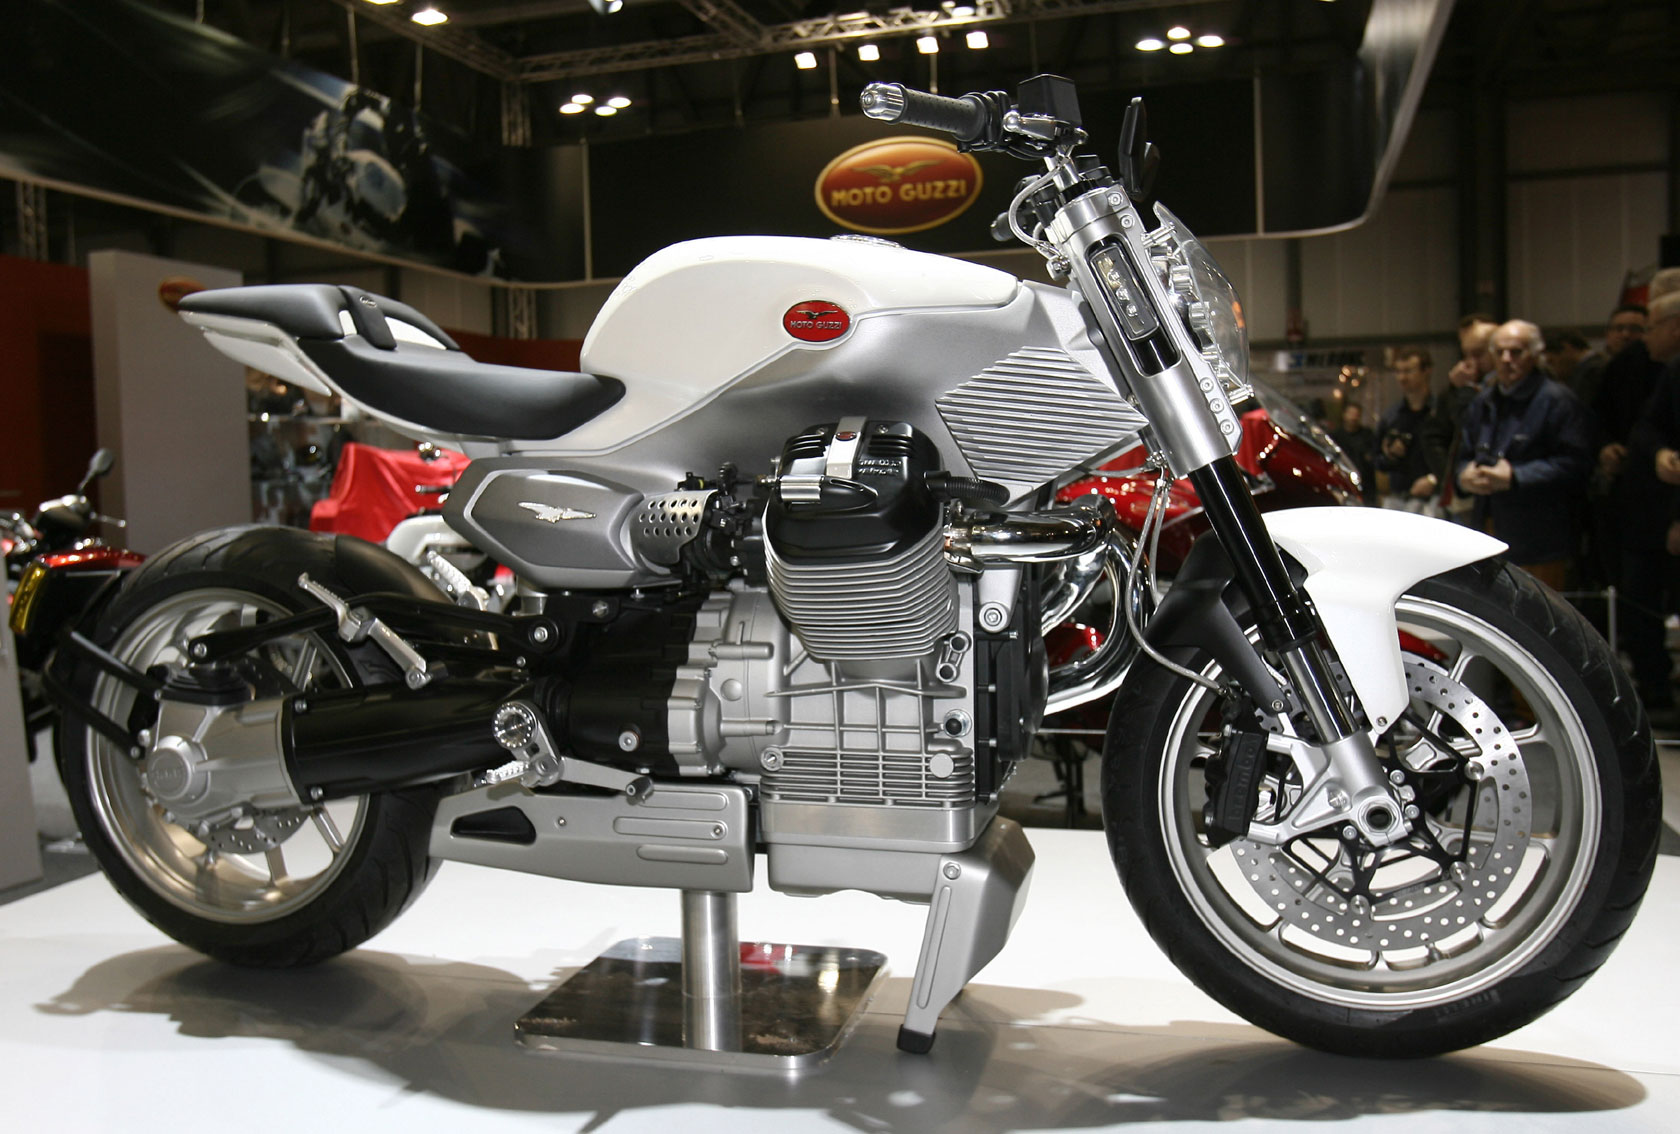 2021 Moto Guzzi V7 Special Guide • Total Motorcycle